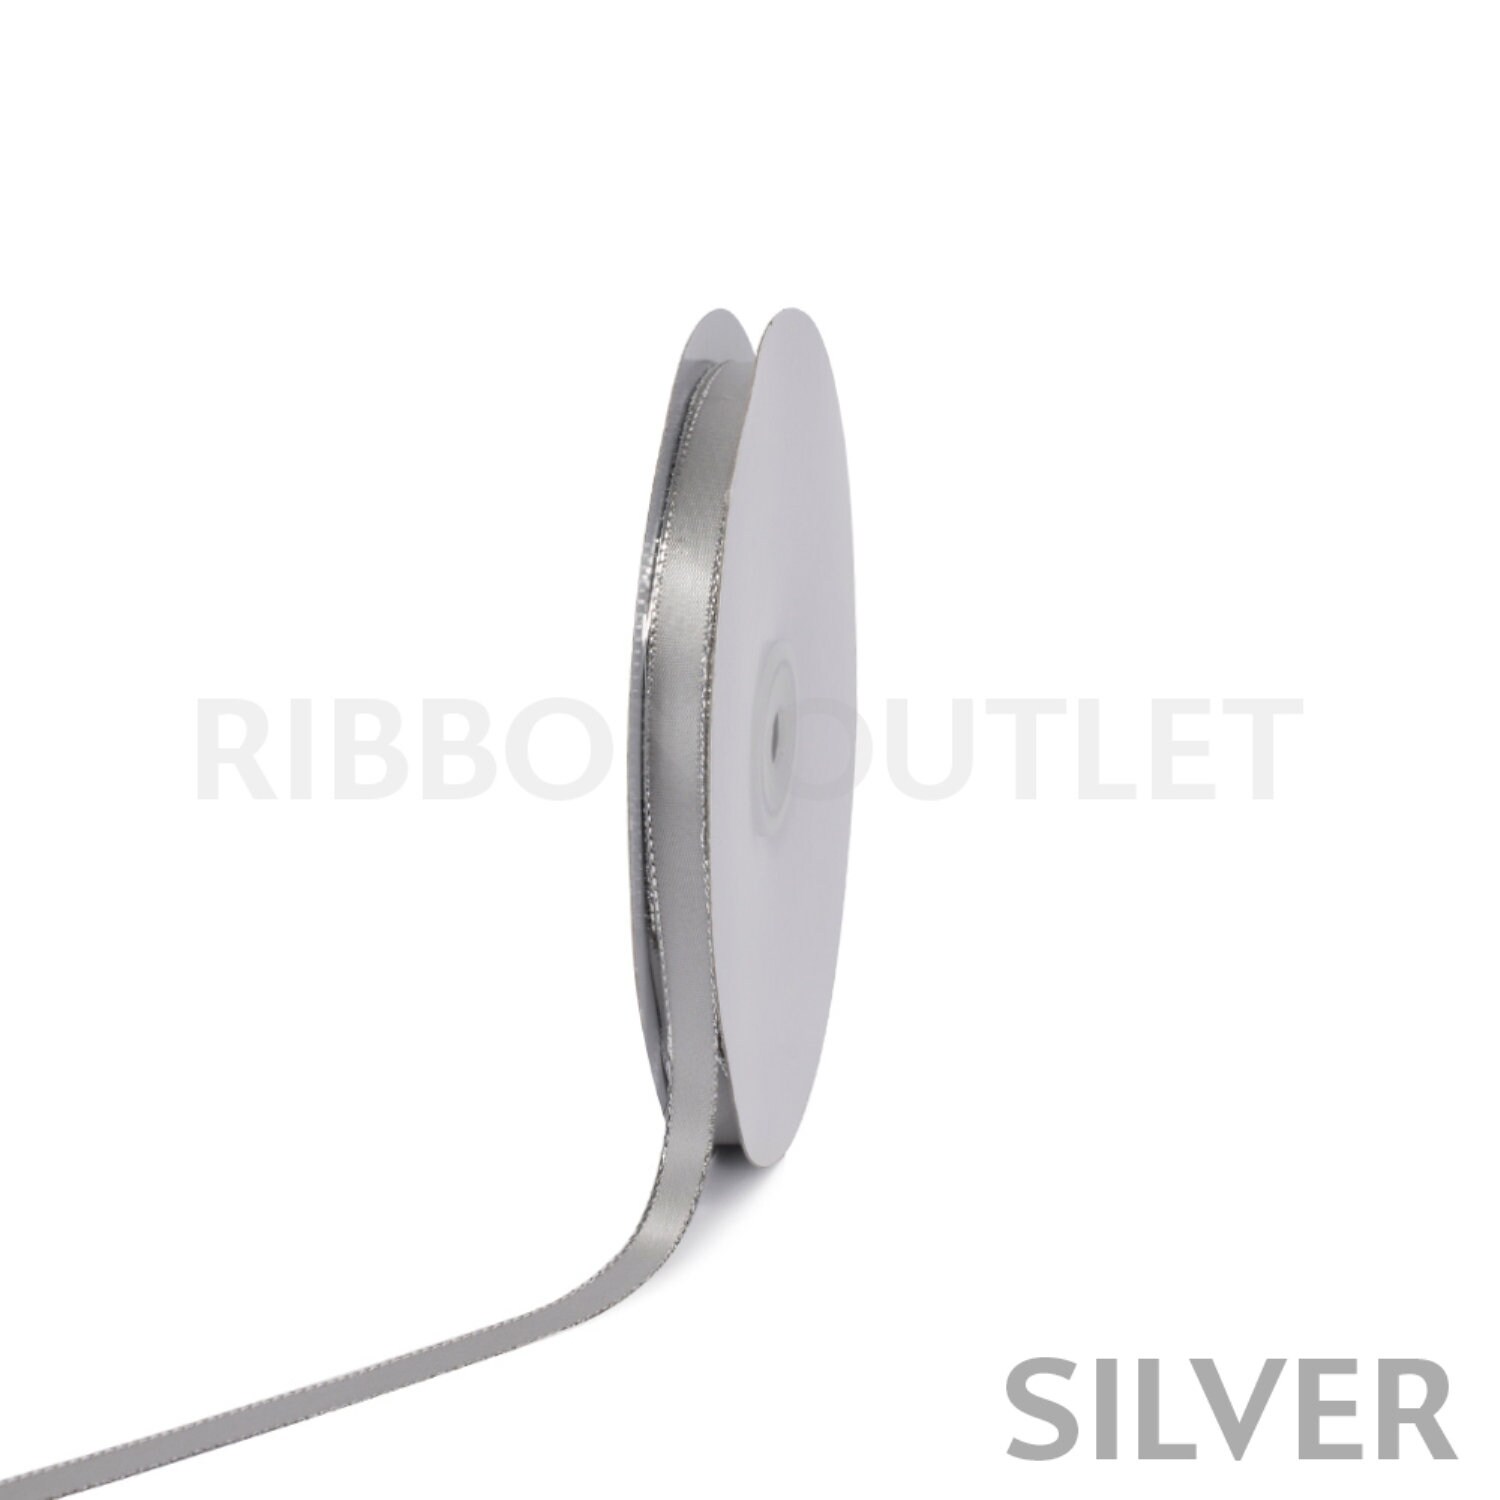 Buy Metallic Silver Ribbon Online. COD. Low Prices. Free Shipping